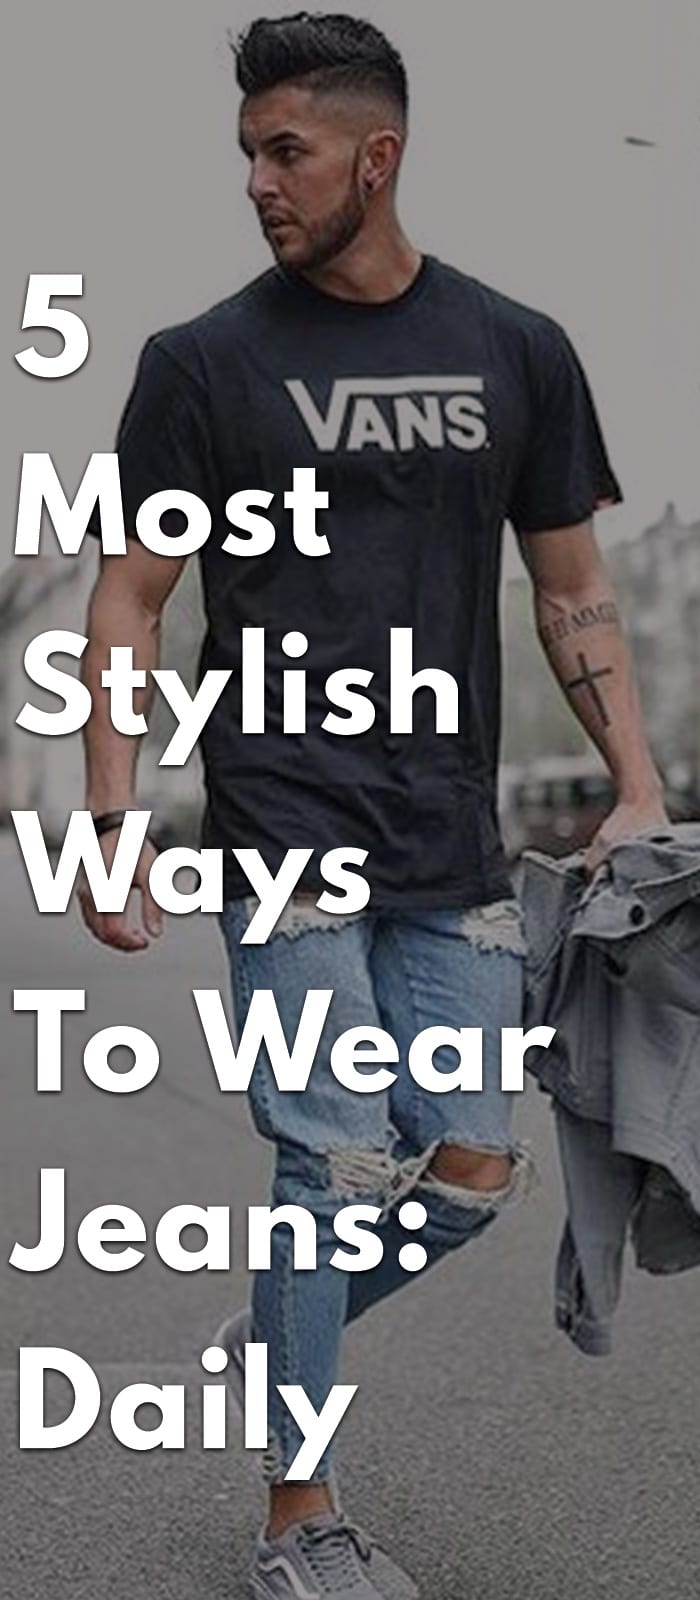 5-Most-Stylish-Ways-To-Wear-Jeans-Daily